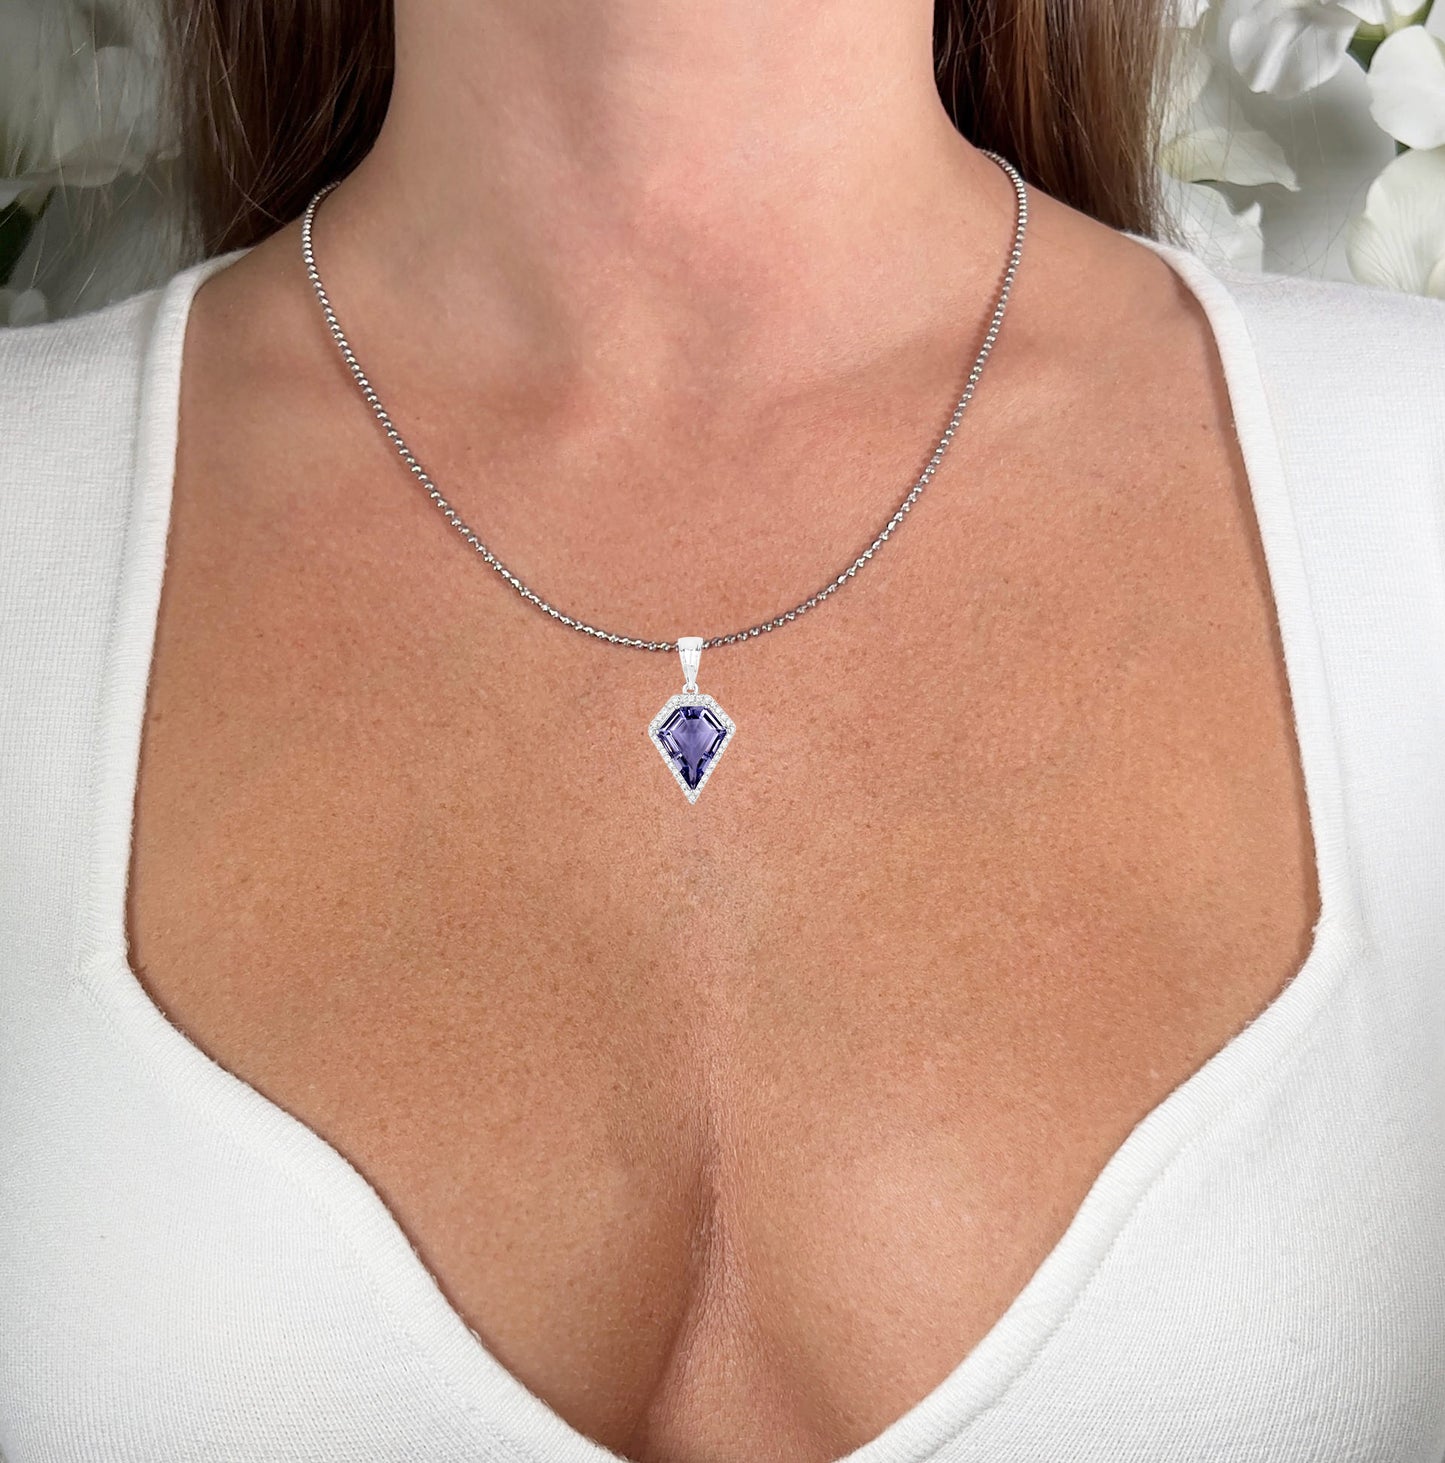 Iolite Pendant Necklace With Diamonds 4.65 Carats 14K White Gold